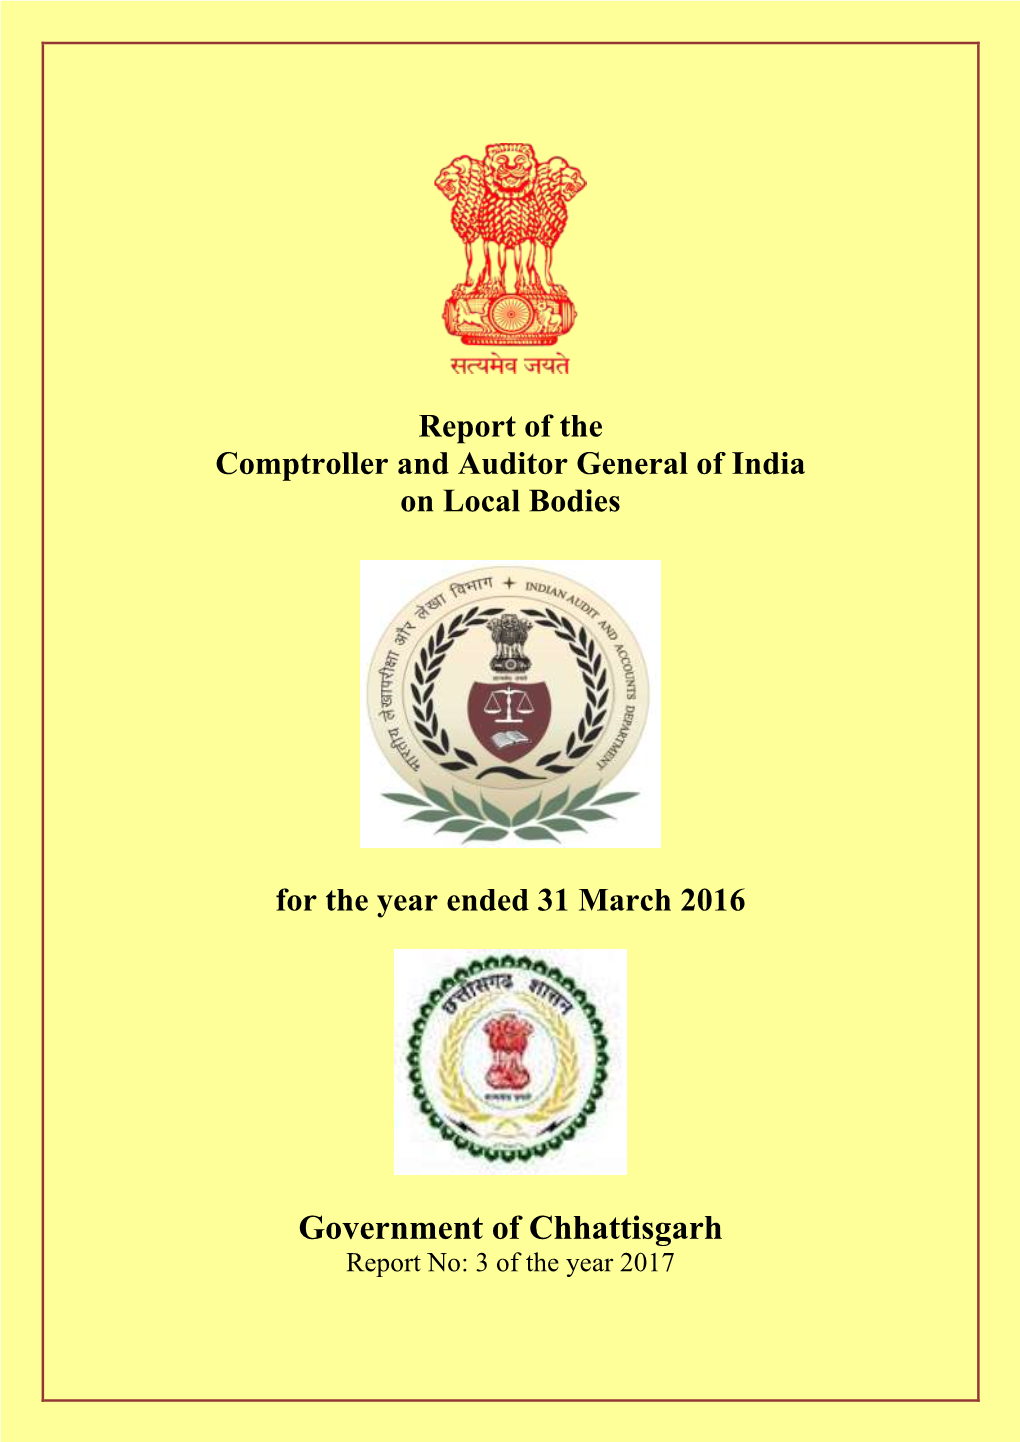 Government of Chhattisgarh Report No: 3 of the Year 2017 Report of the Comptroller and Auditor General of India on Local Bodies